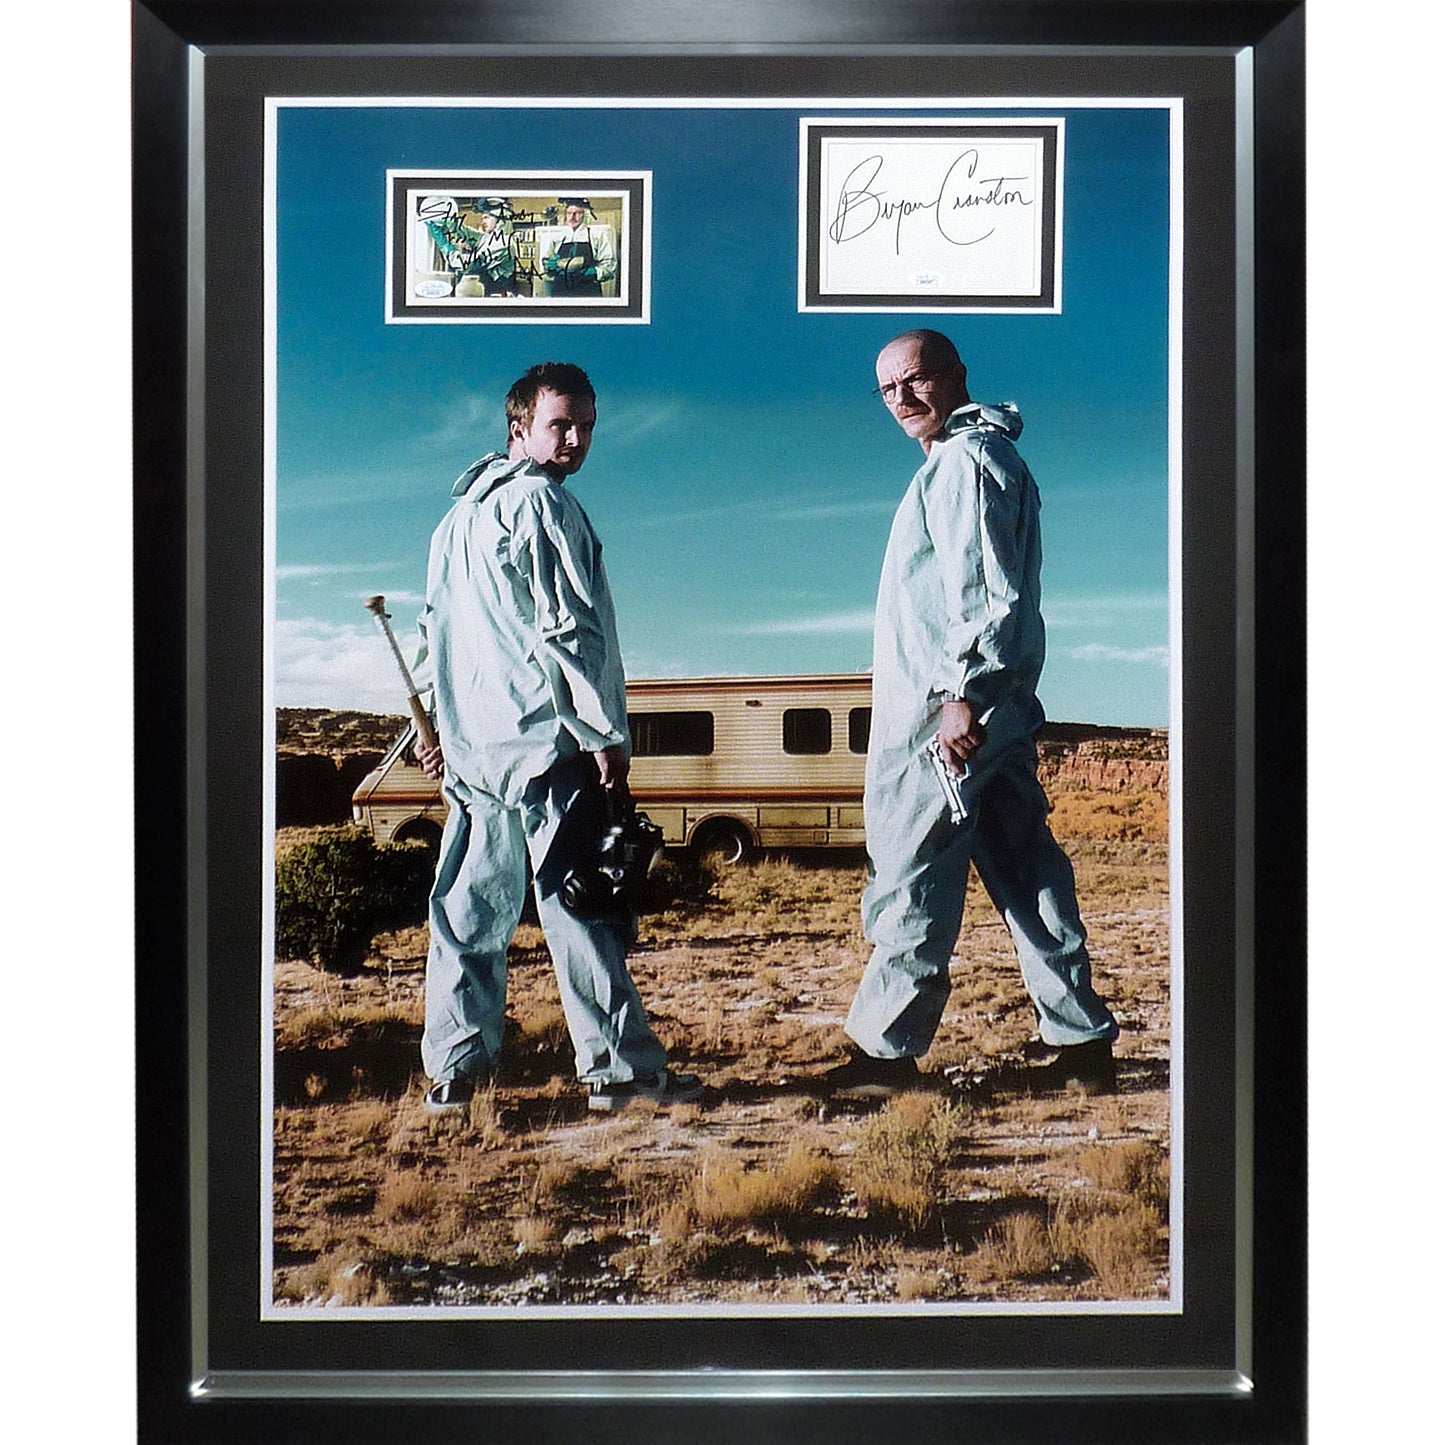 Breaking Bad Full-Size TV Poster Deluxe Framed with Bryan Cranston and Aaron Paul Autographs - JSA